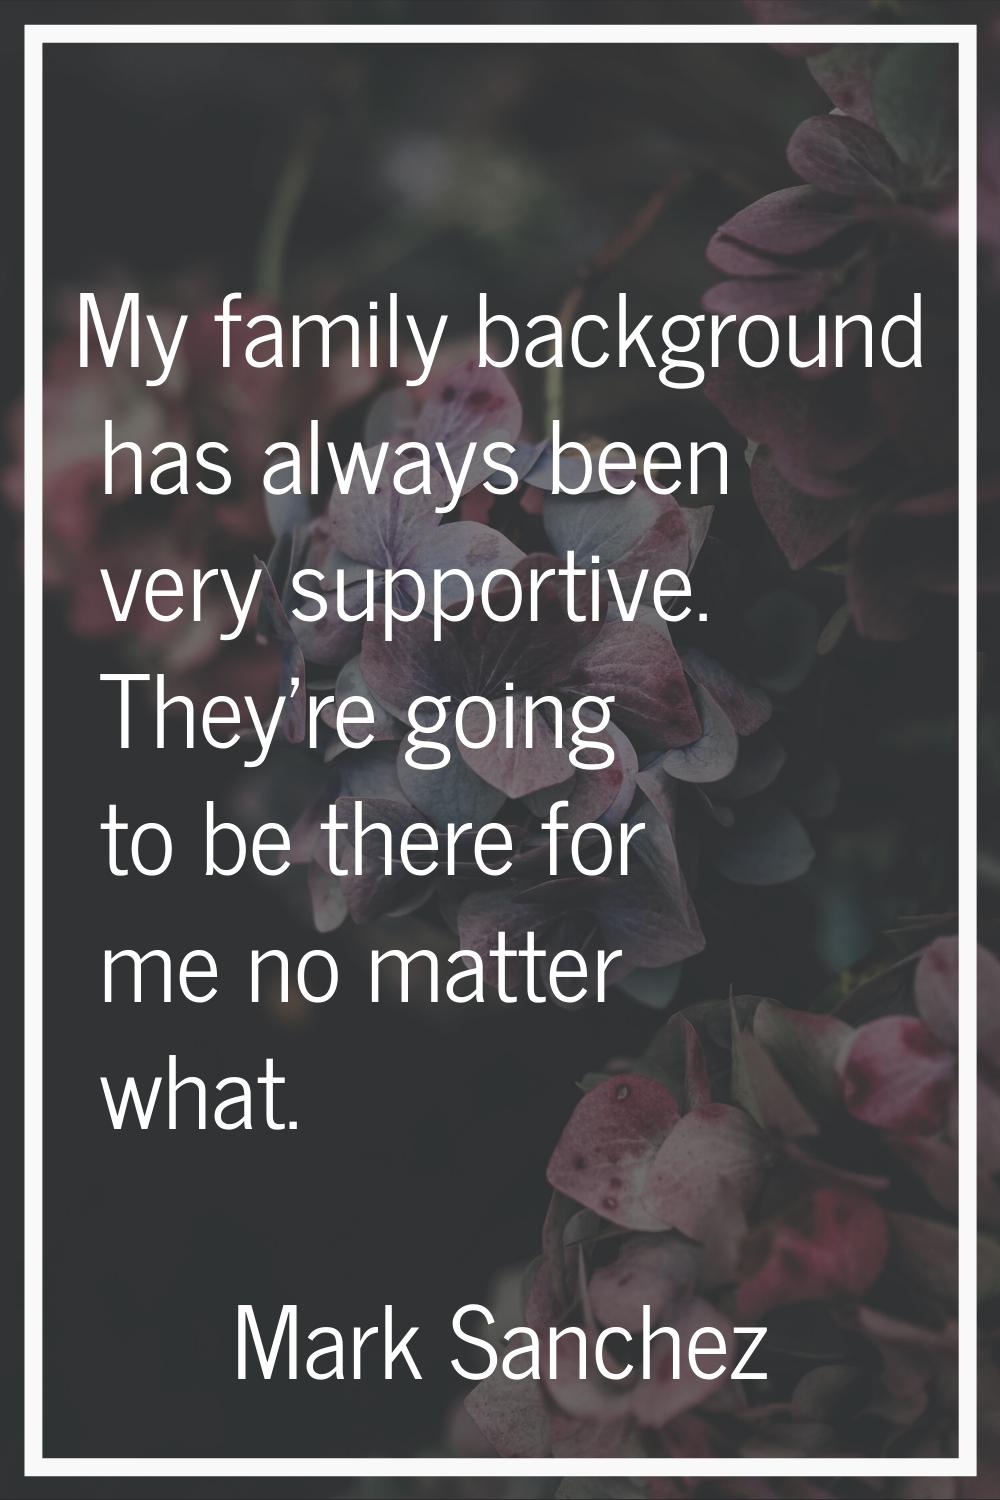 My family background has always been very supportive. They're going to be there for me no matter wh